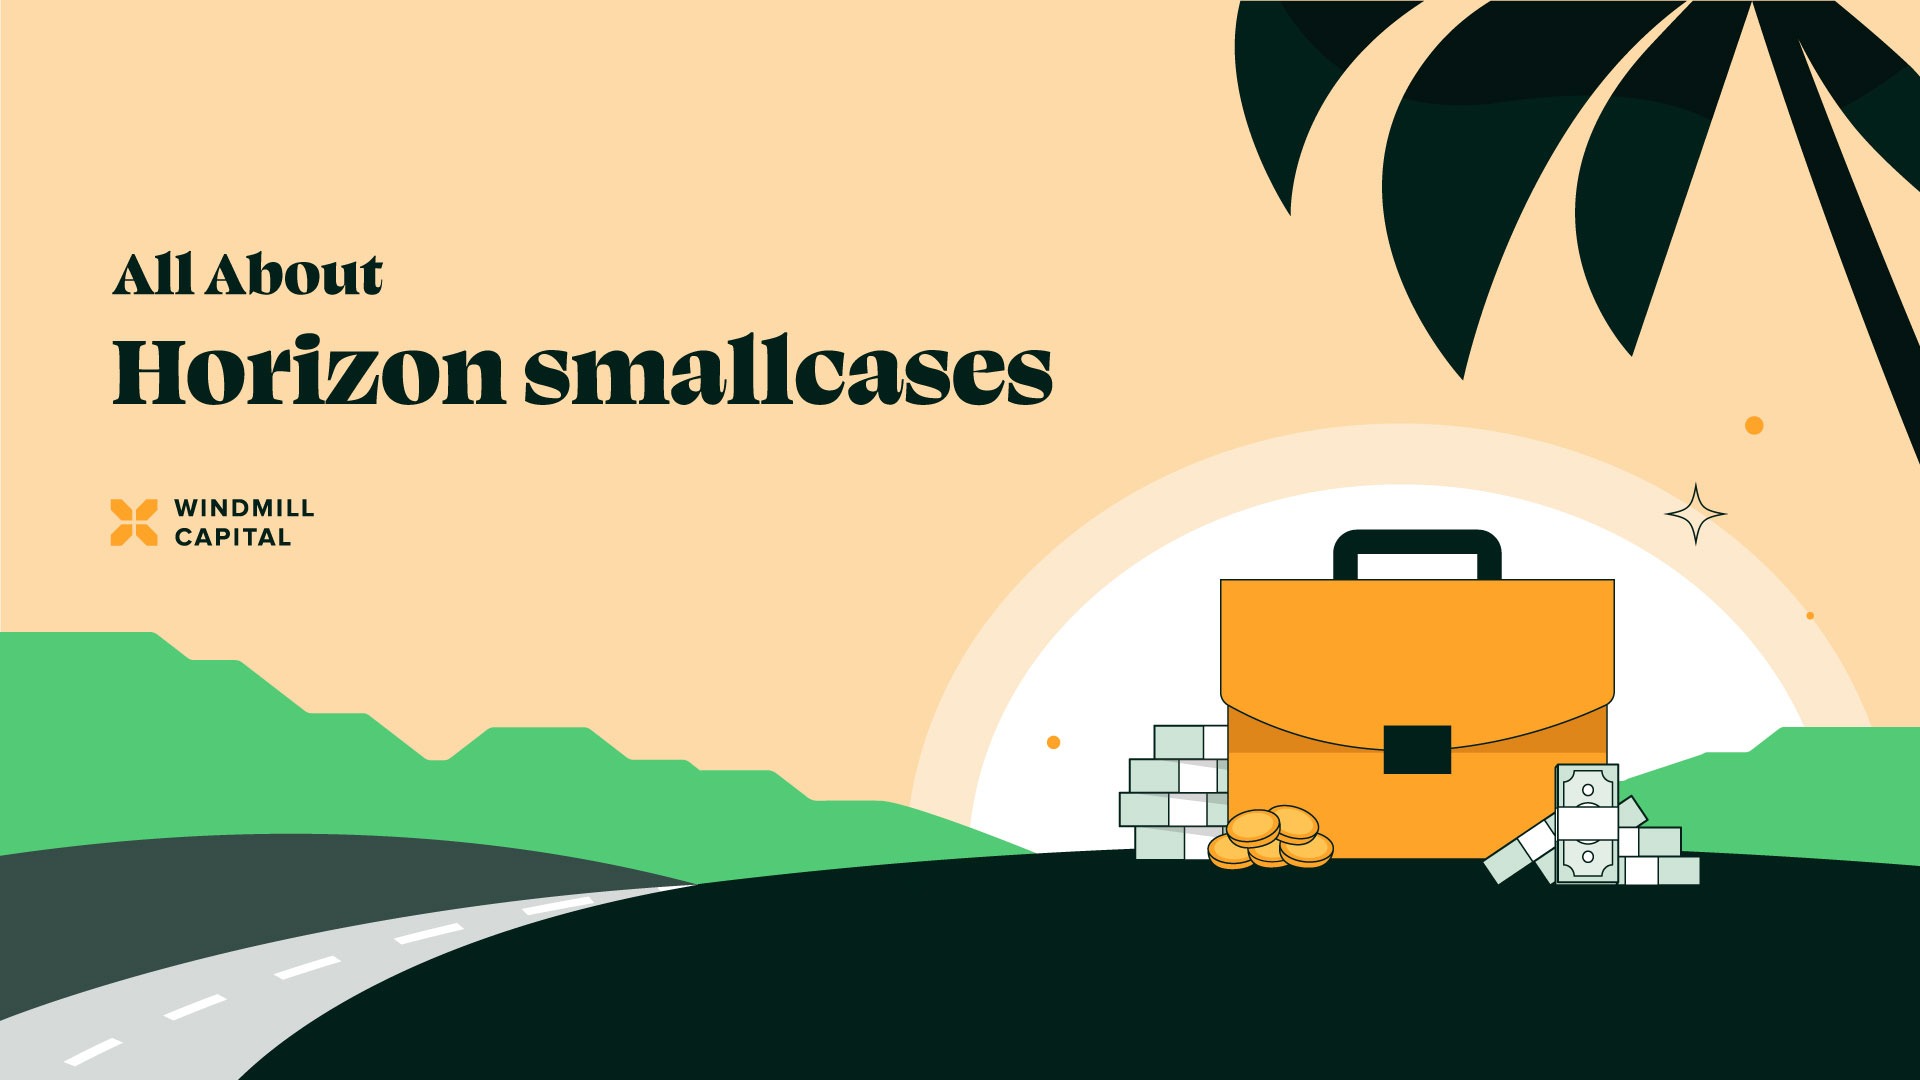 All About Horizon smallcases